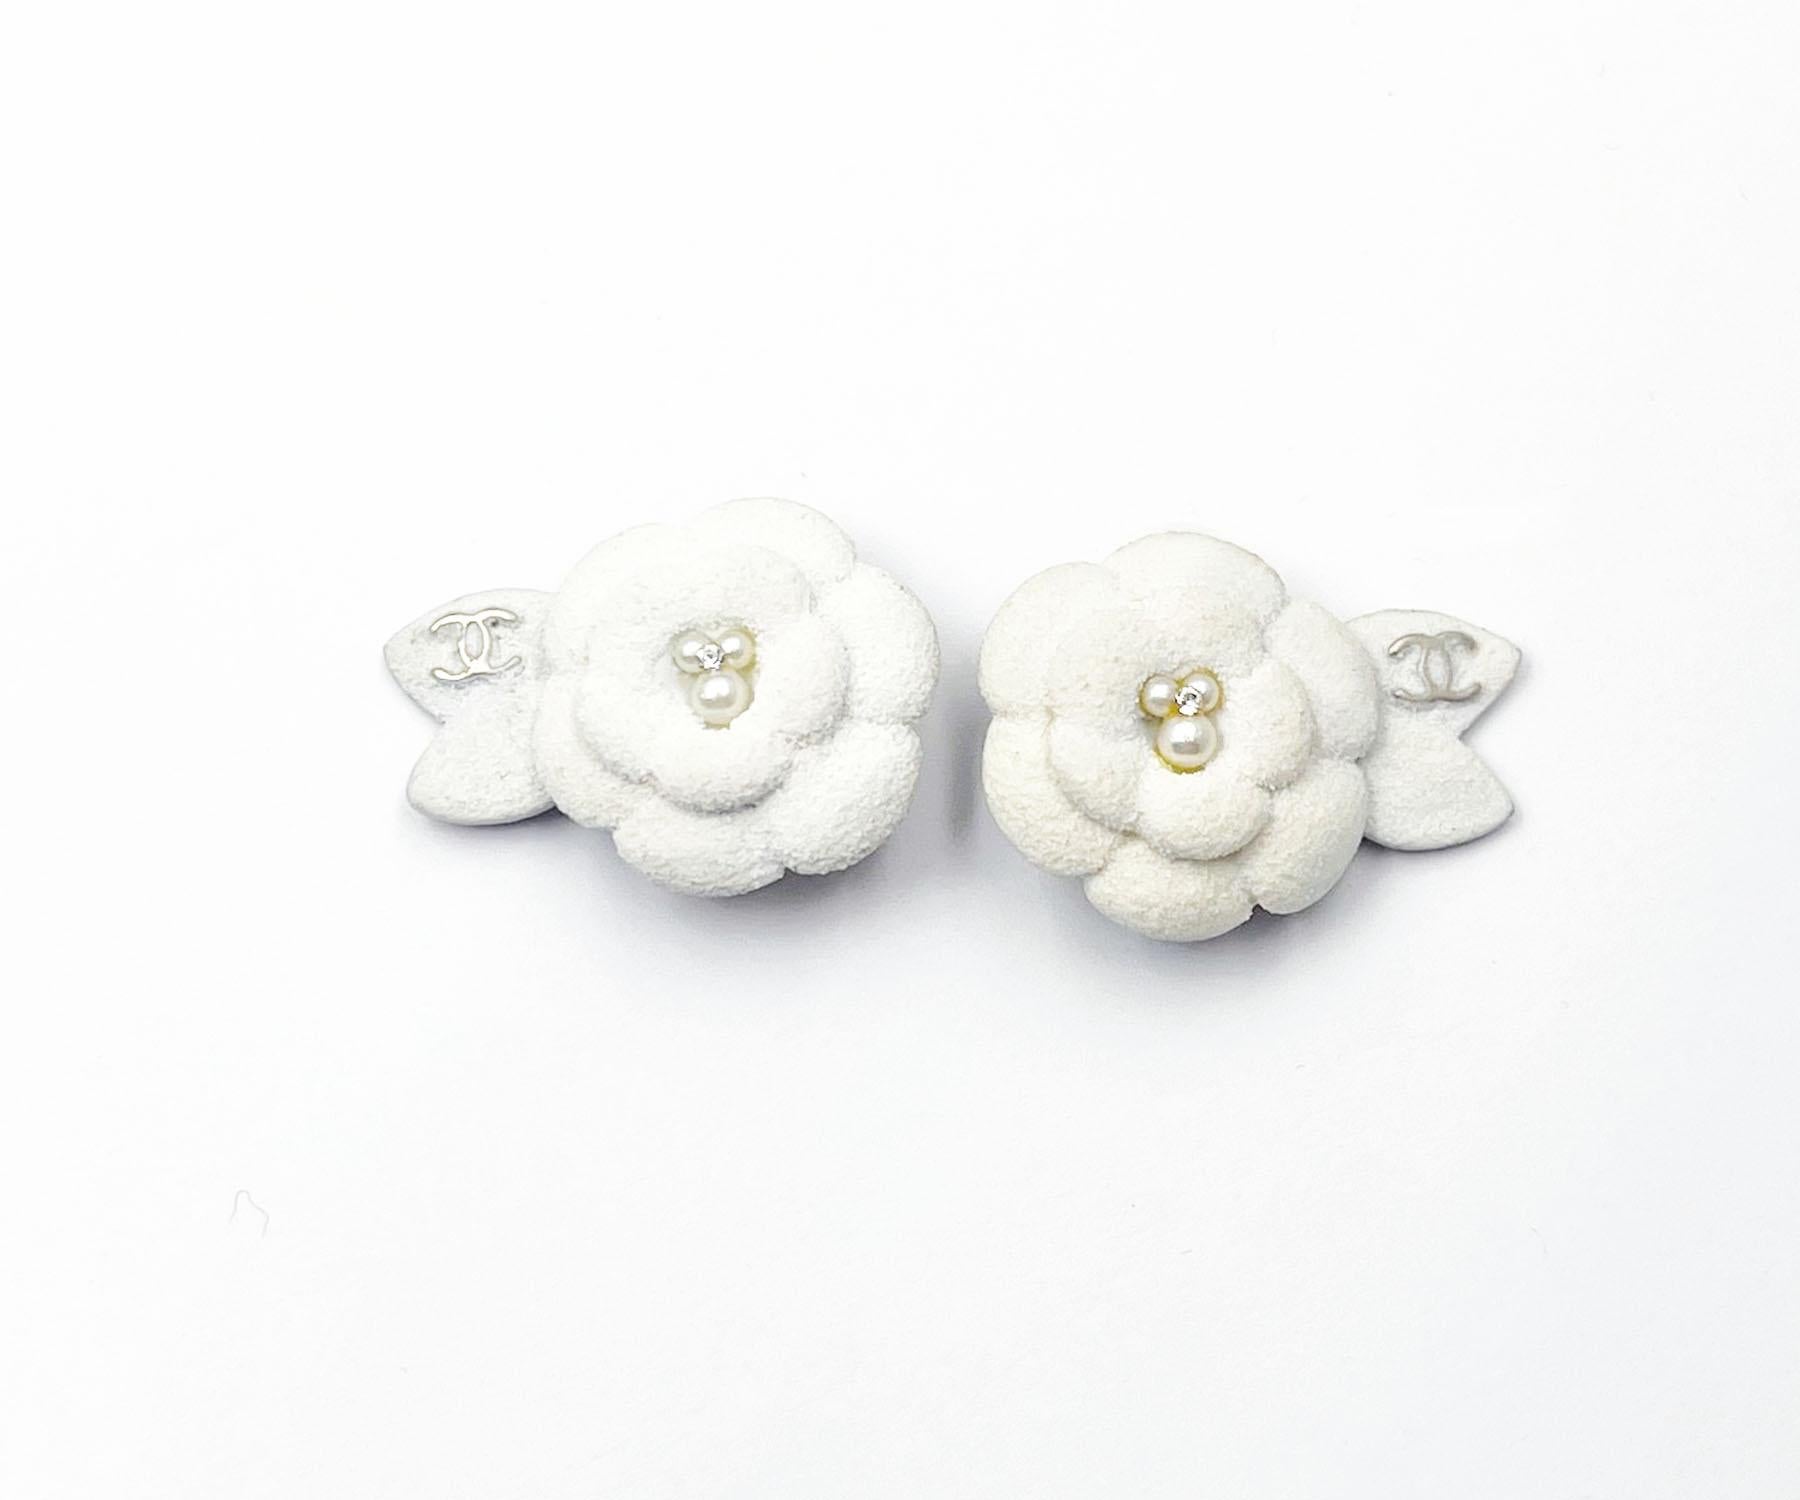 Chanel Silver CC Ivory Camellia Flower Clip on Earrings

*Marked 05
*Made in France
*Comes with the original box

-It is approximately 1.25